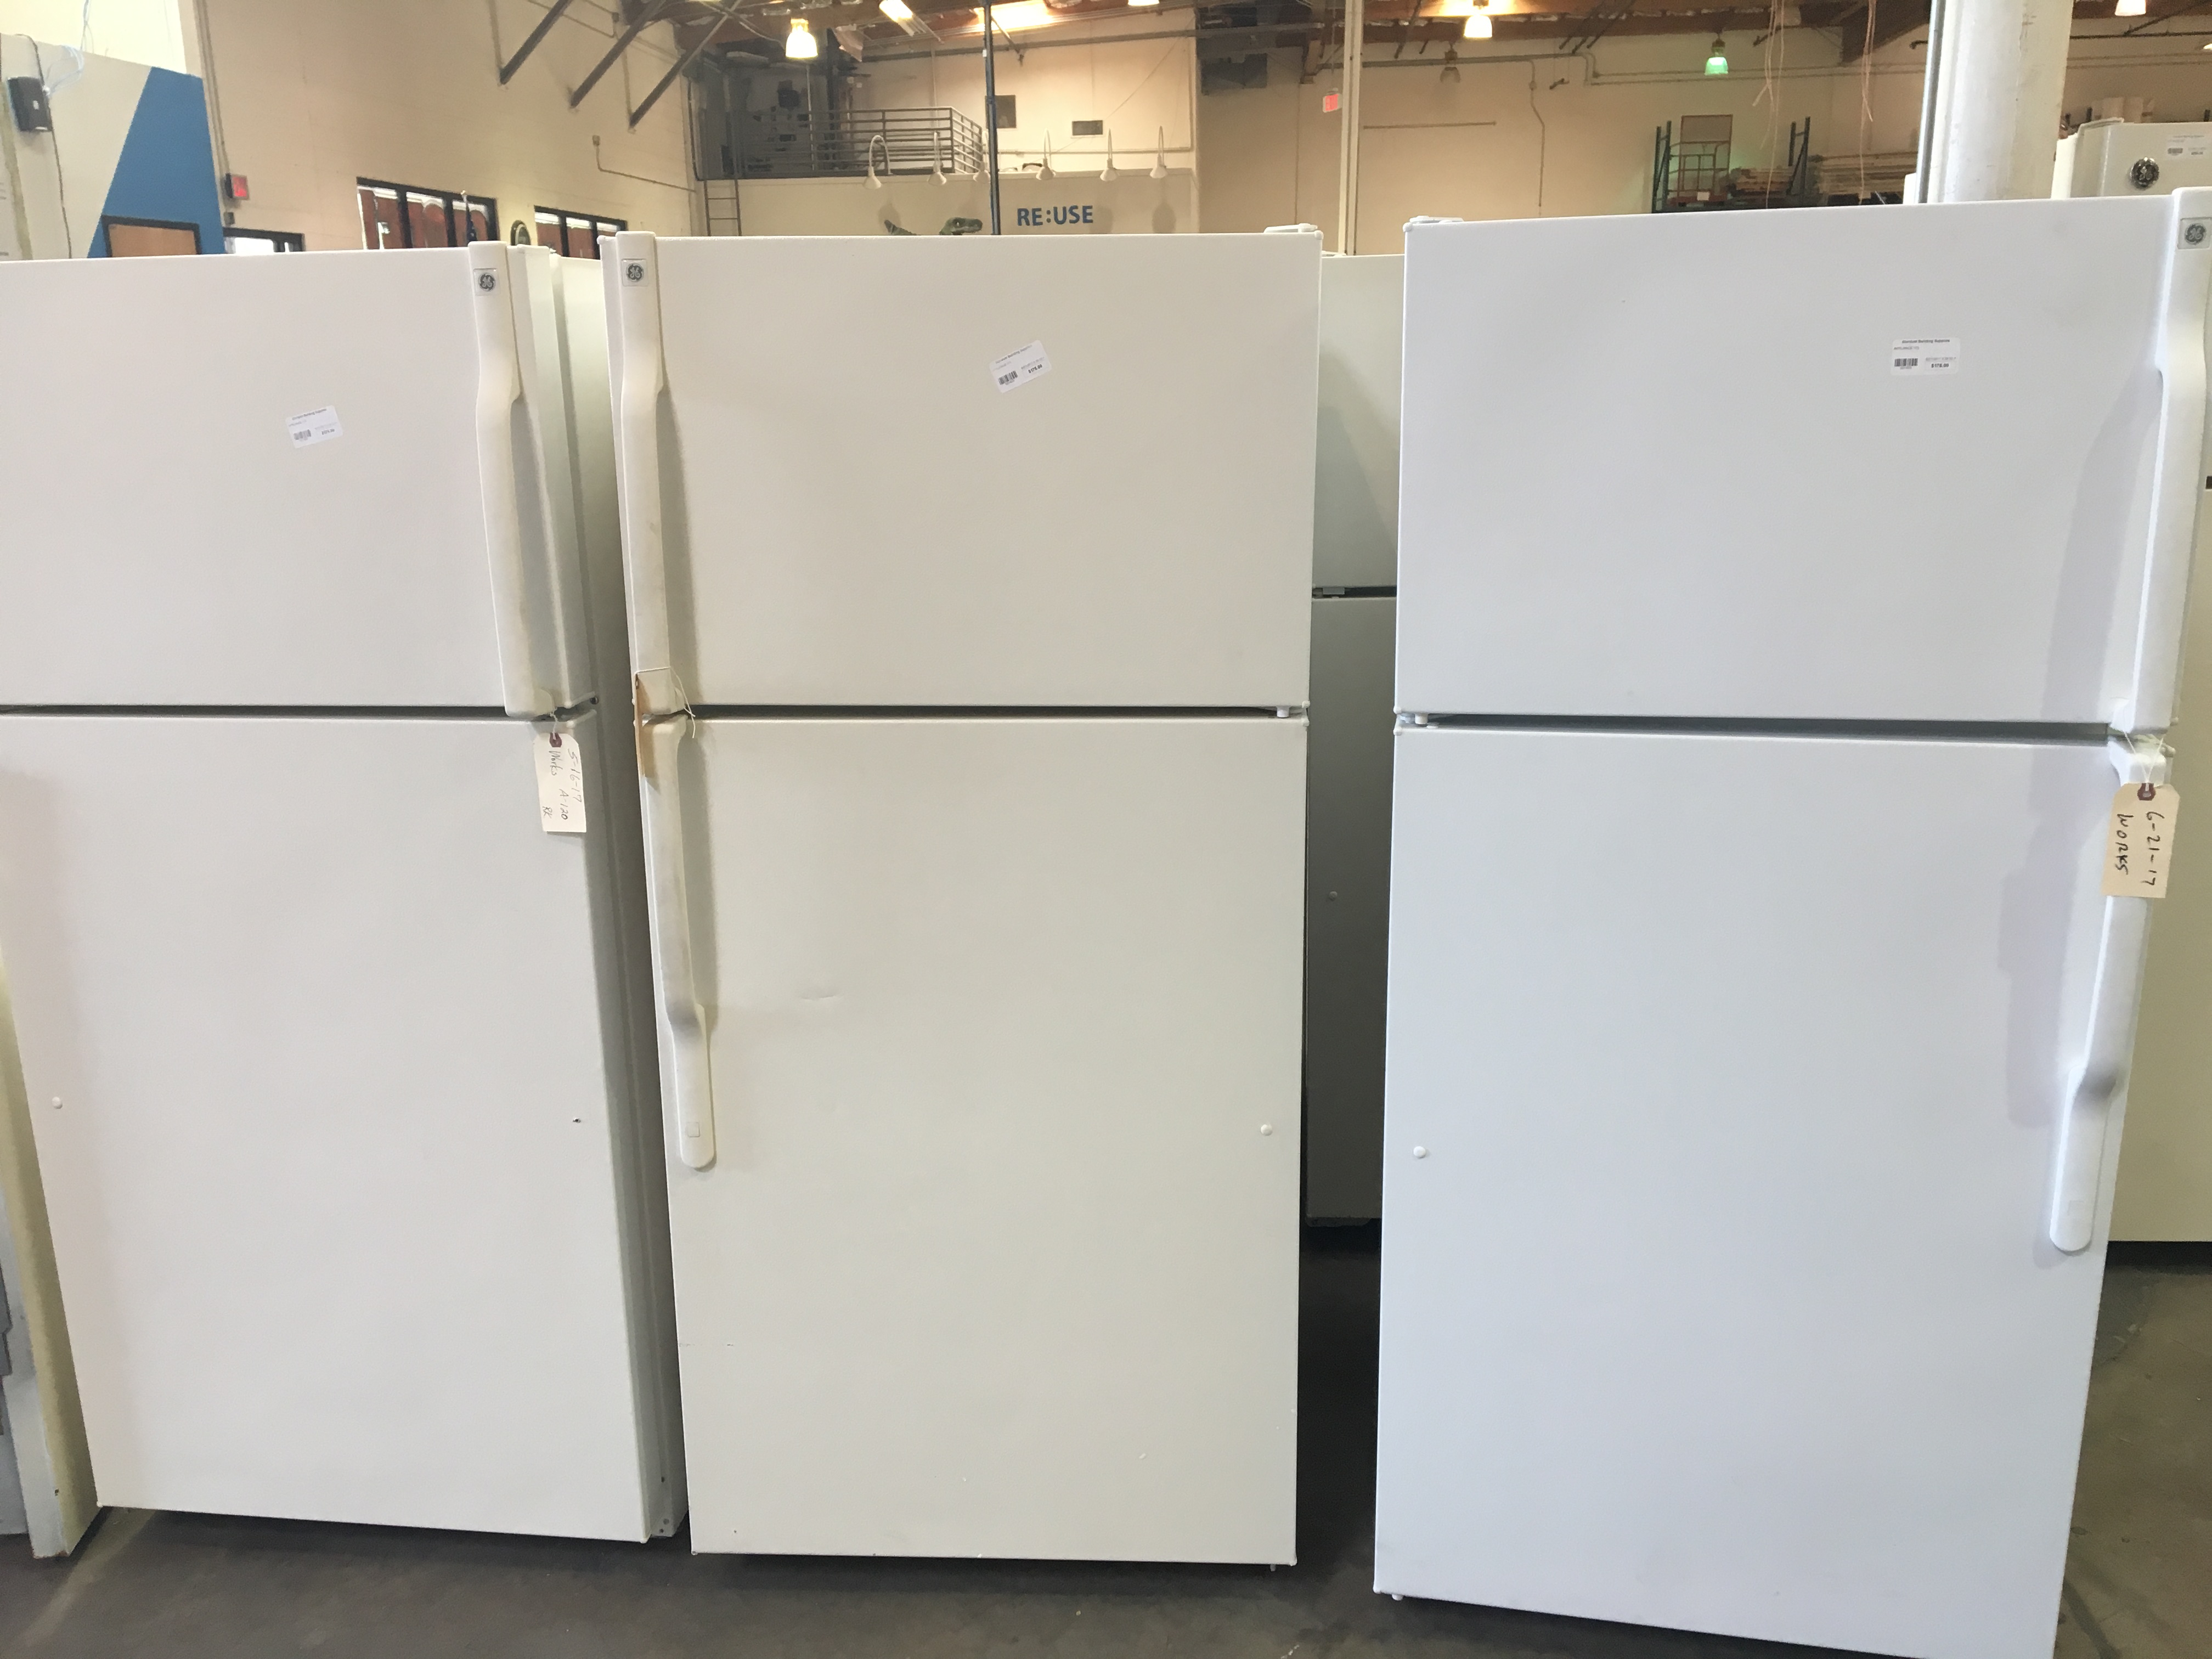 We accept sinks, appliances, light fixtures, cabinets, and a many other building materials for reuse. 